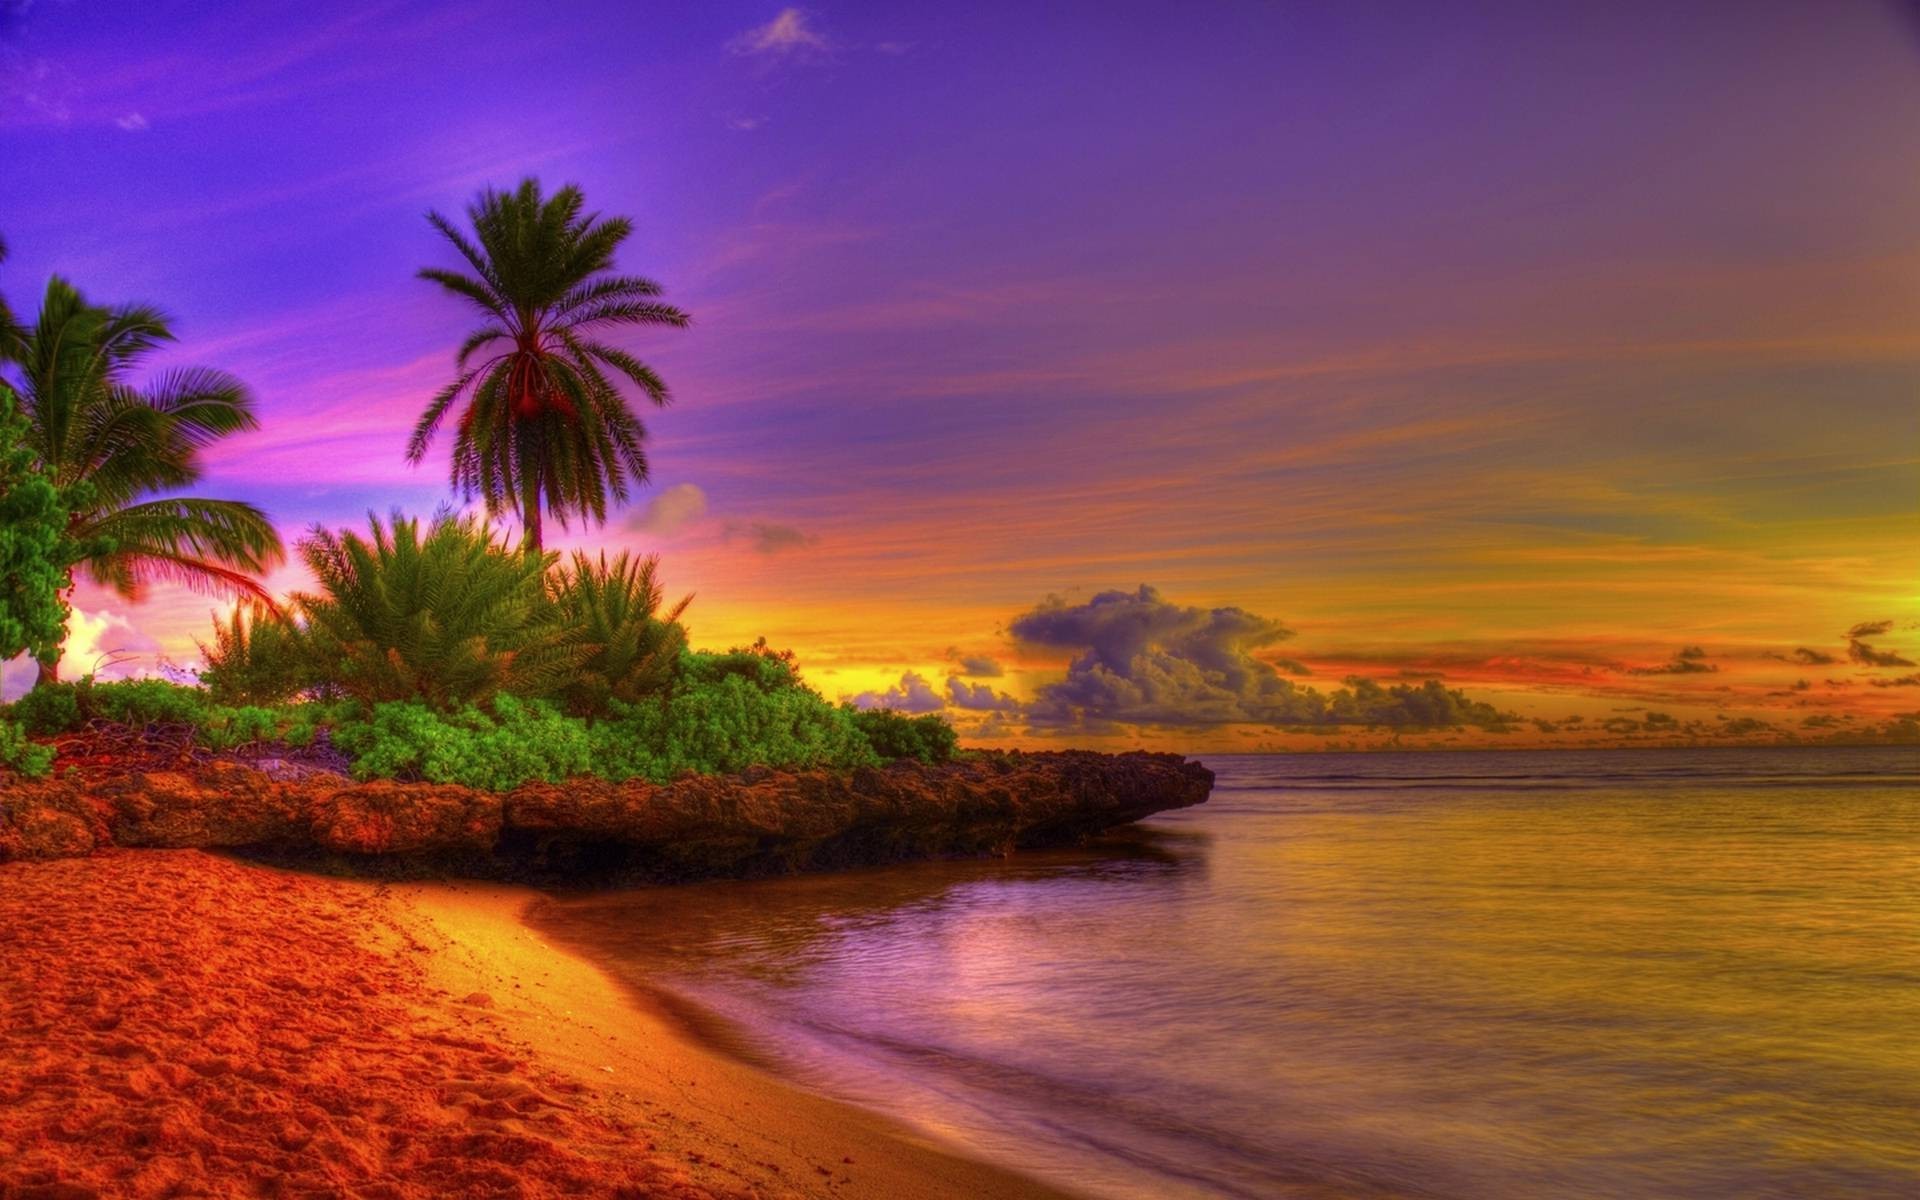 1920x1200 Pics In High Quality - Tropical Beach by Aoide Gealy